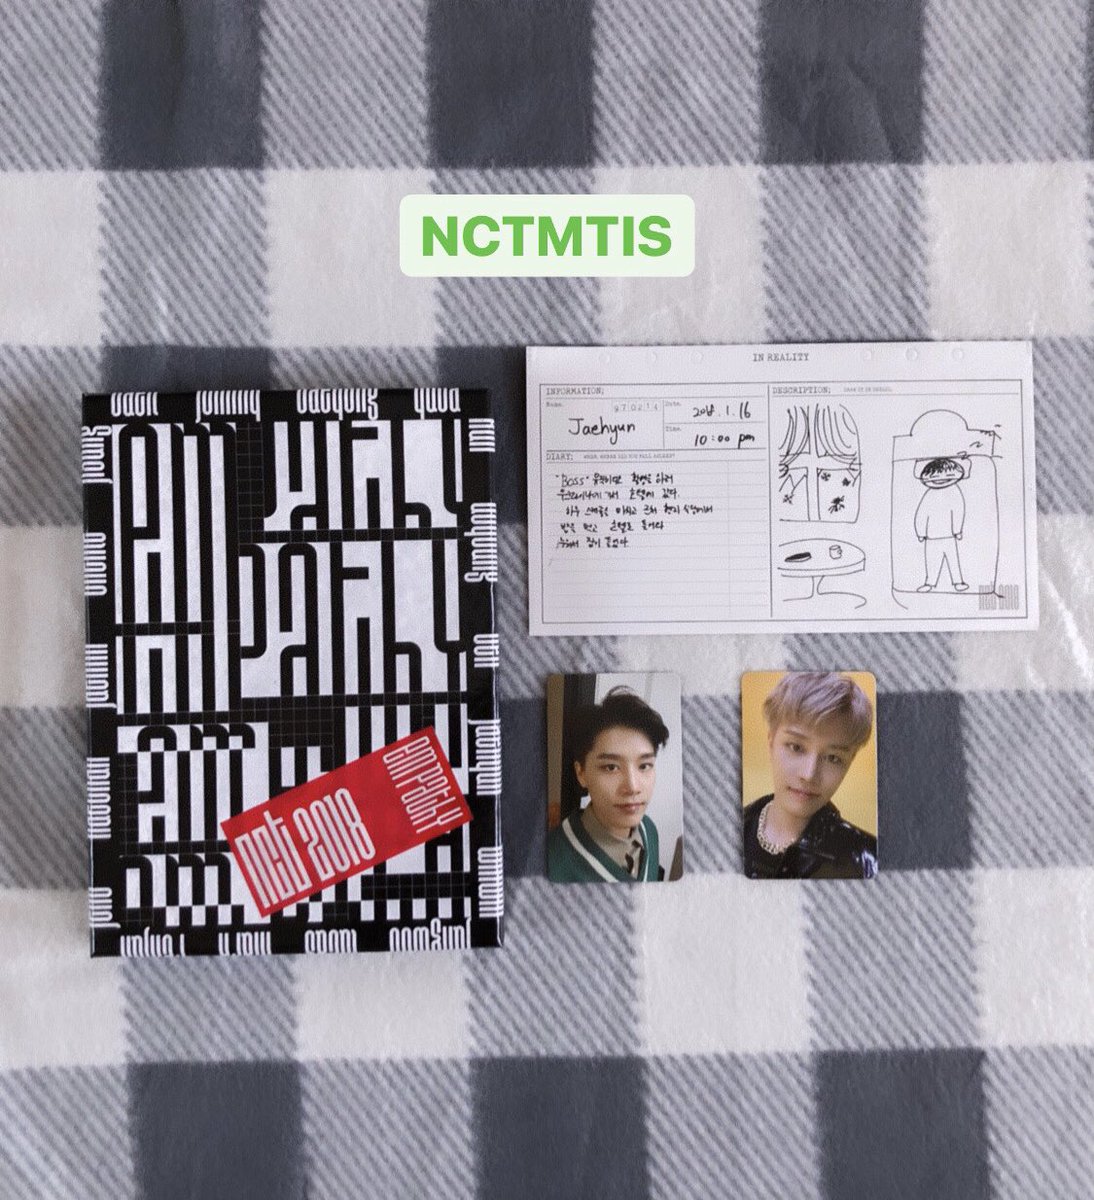  [NCT] Moon Taeil Items• N2018ERT: Php 750 + LSF• NTMTIPC: Php 250 + LSF• NCTMTIS (Taeil Set): Php 950 + LSF wts lfb ph nct 127 empathy reality neozone taeil jaehyun[ #neoshop_onhands]